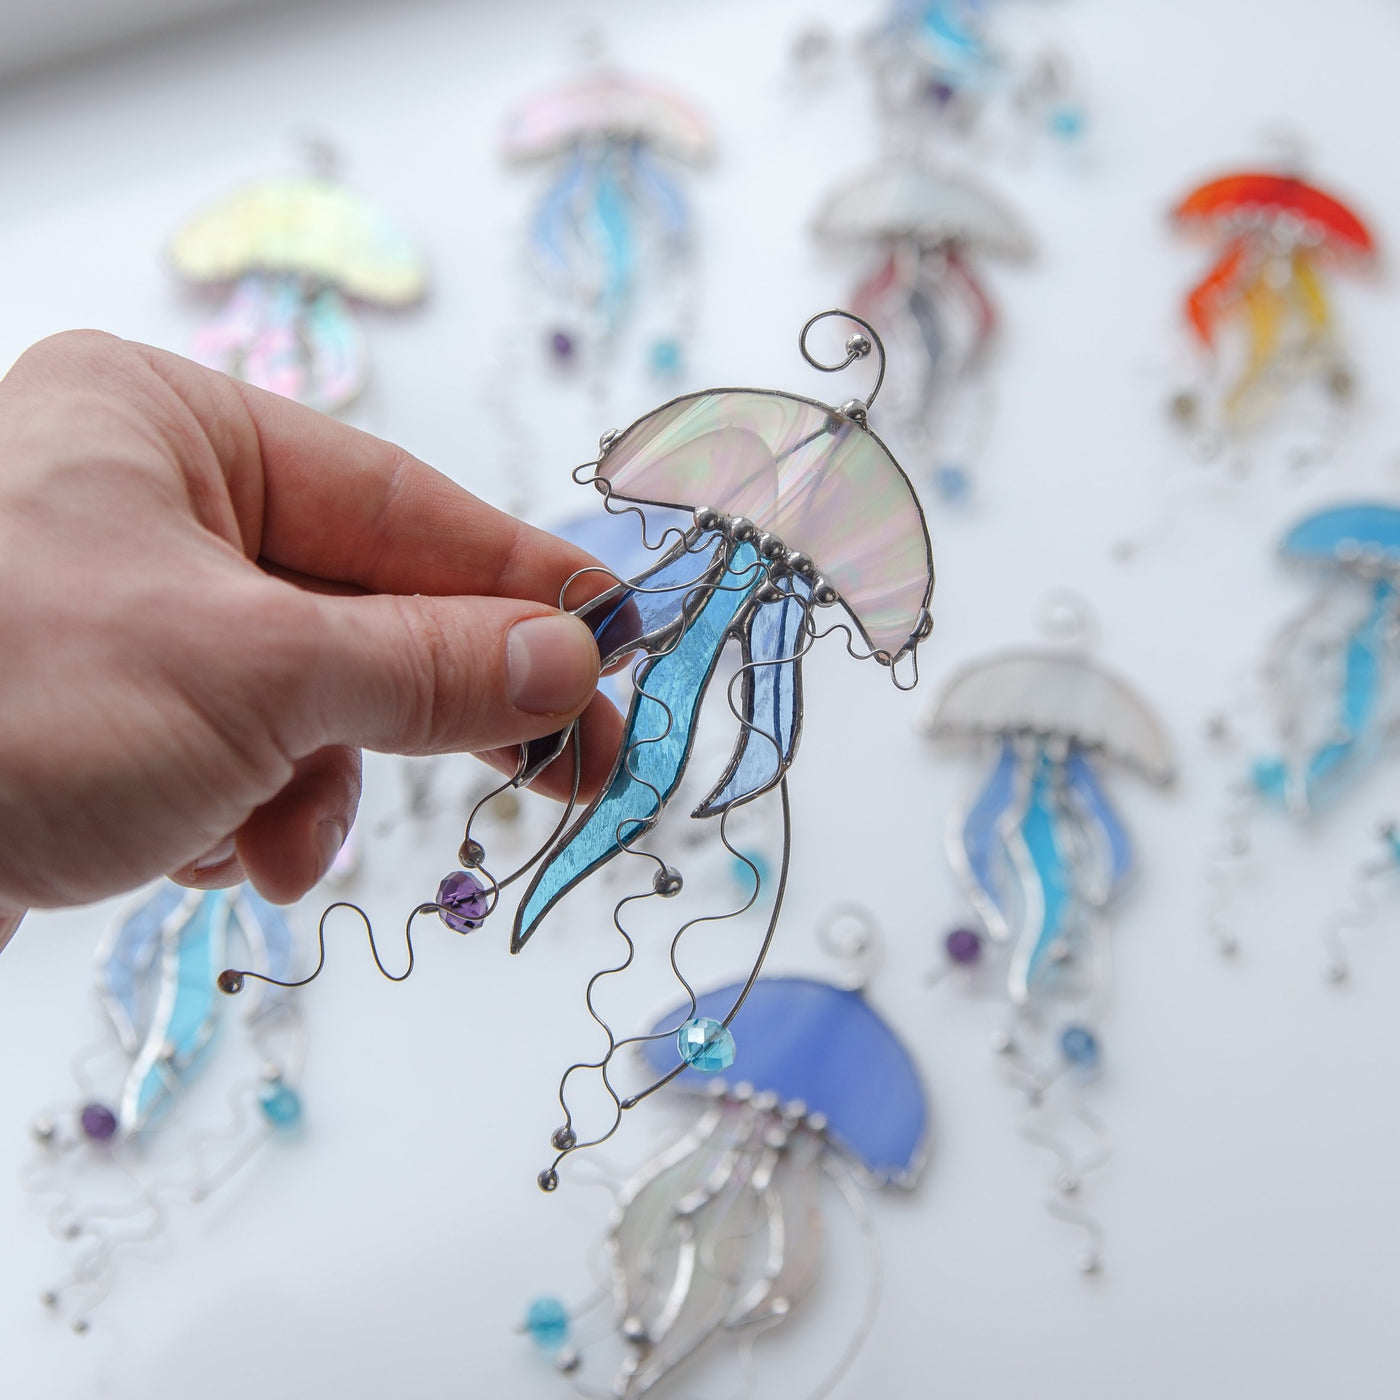 Iridescent jellyfish with blue tentacles stained glass window hanging